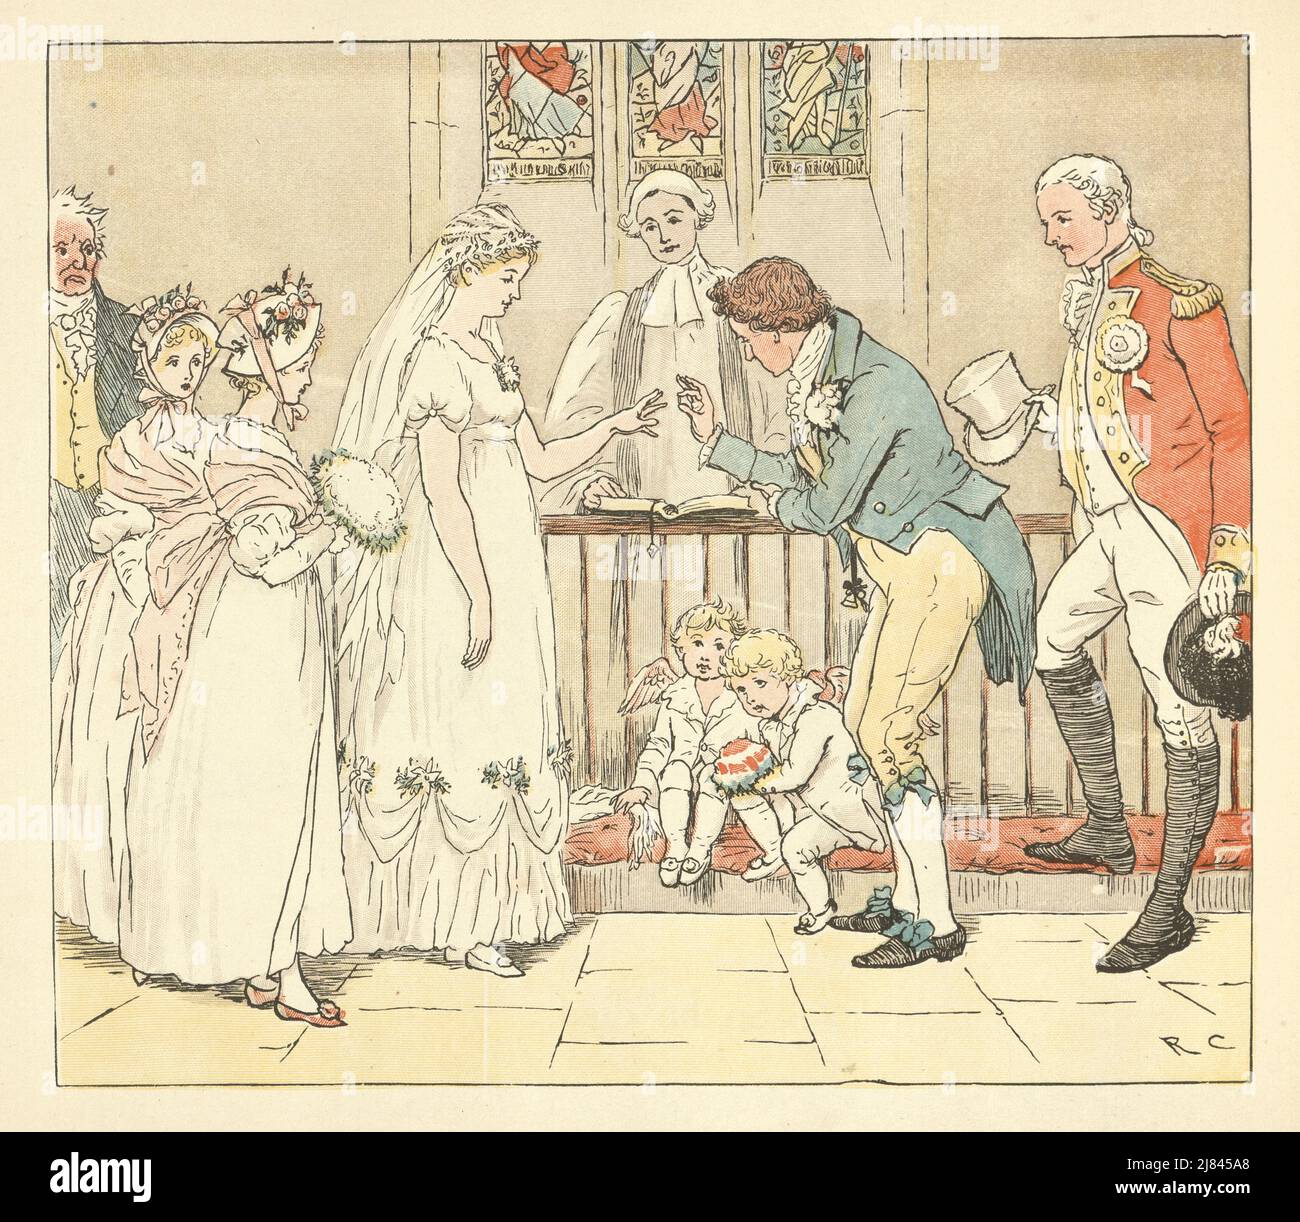 Vintage illustration of Scene from The Great Panjandrum Himself, Illustrated by Randolph Caldecott. Young couple getting married, church wedding, 18th Century style Stock Photo